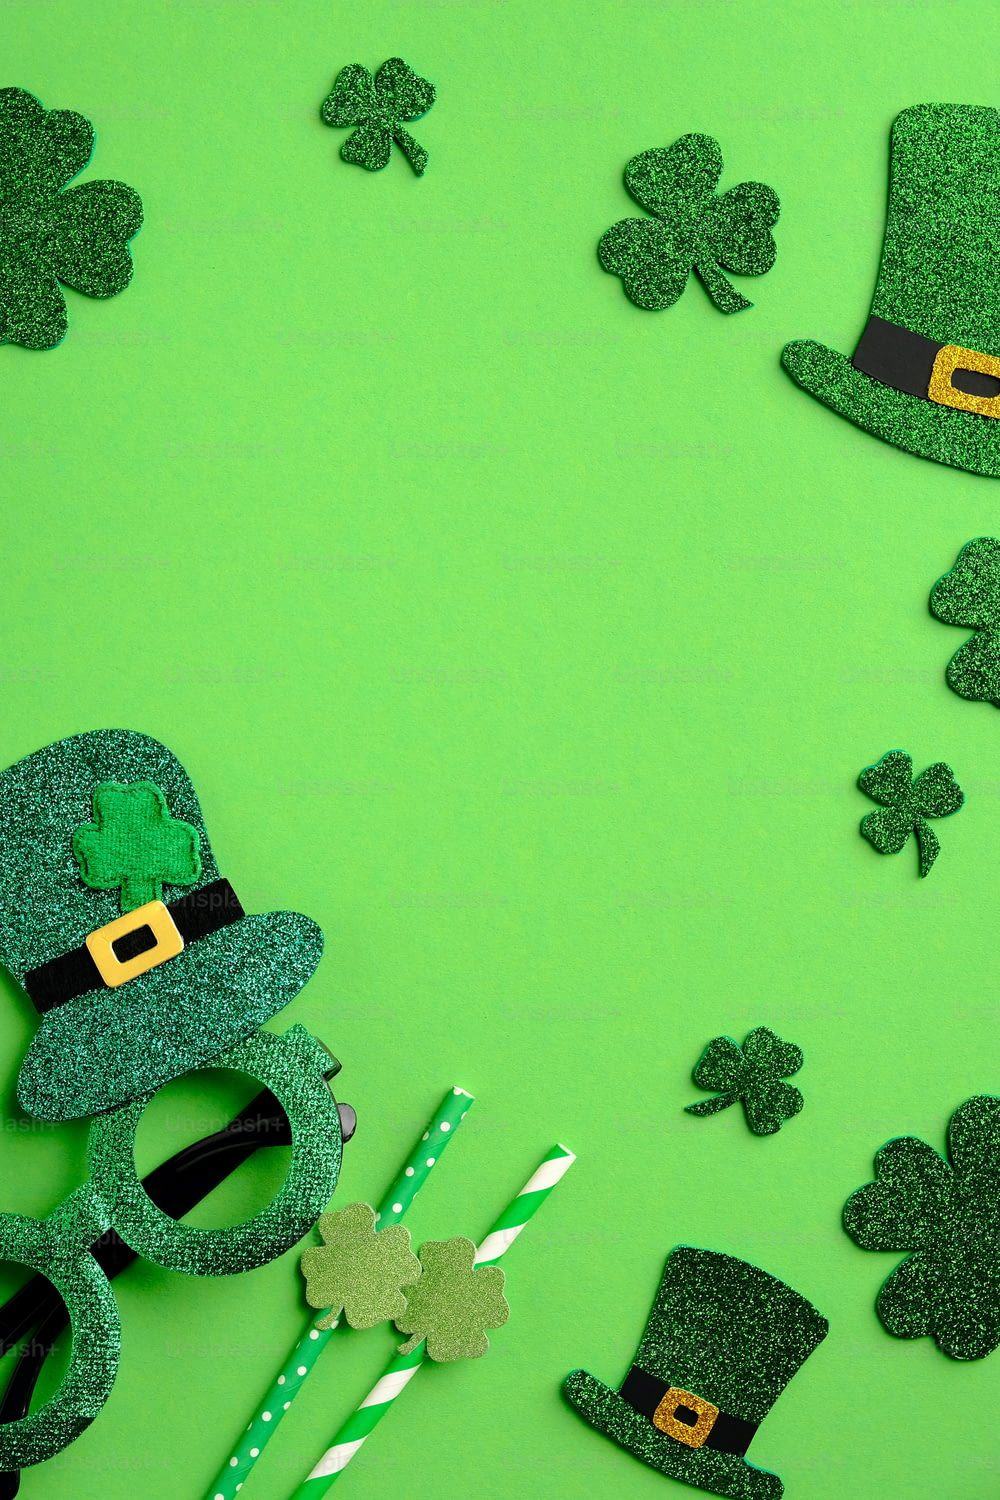 St Patrick's Day vertical banner design. Irish elf hats, shamrock leaves, party glasses on green background with copy space. Happy Saint Patricks Day concept